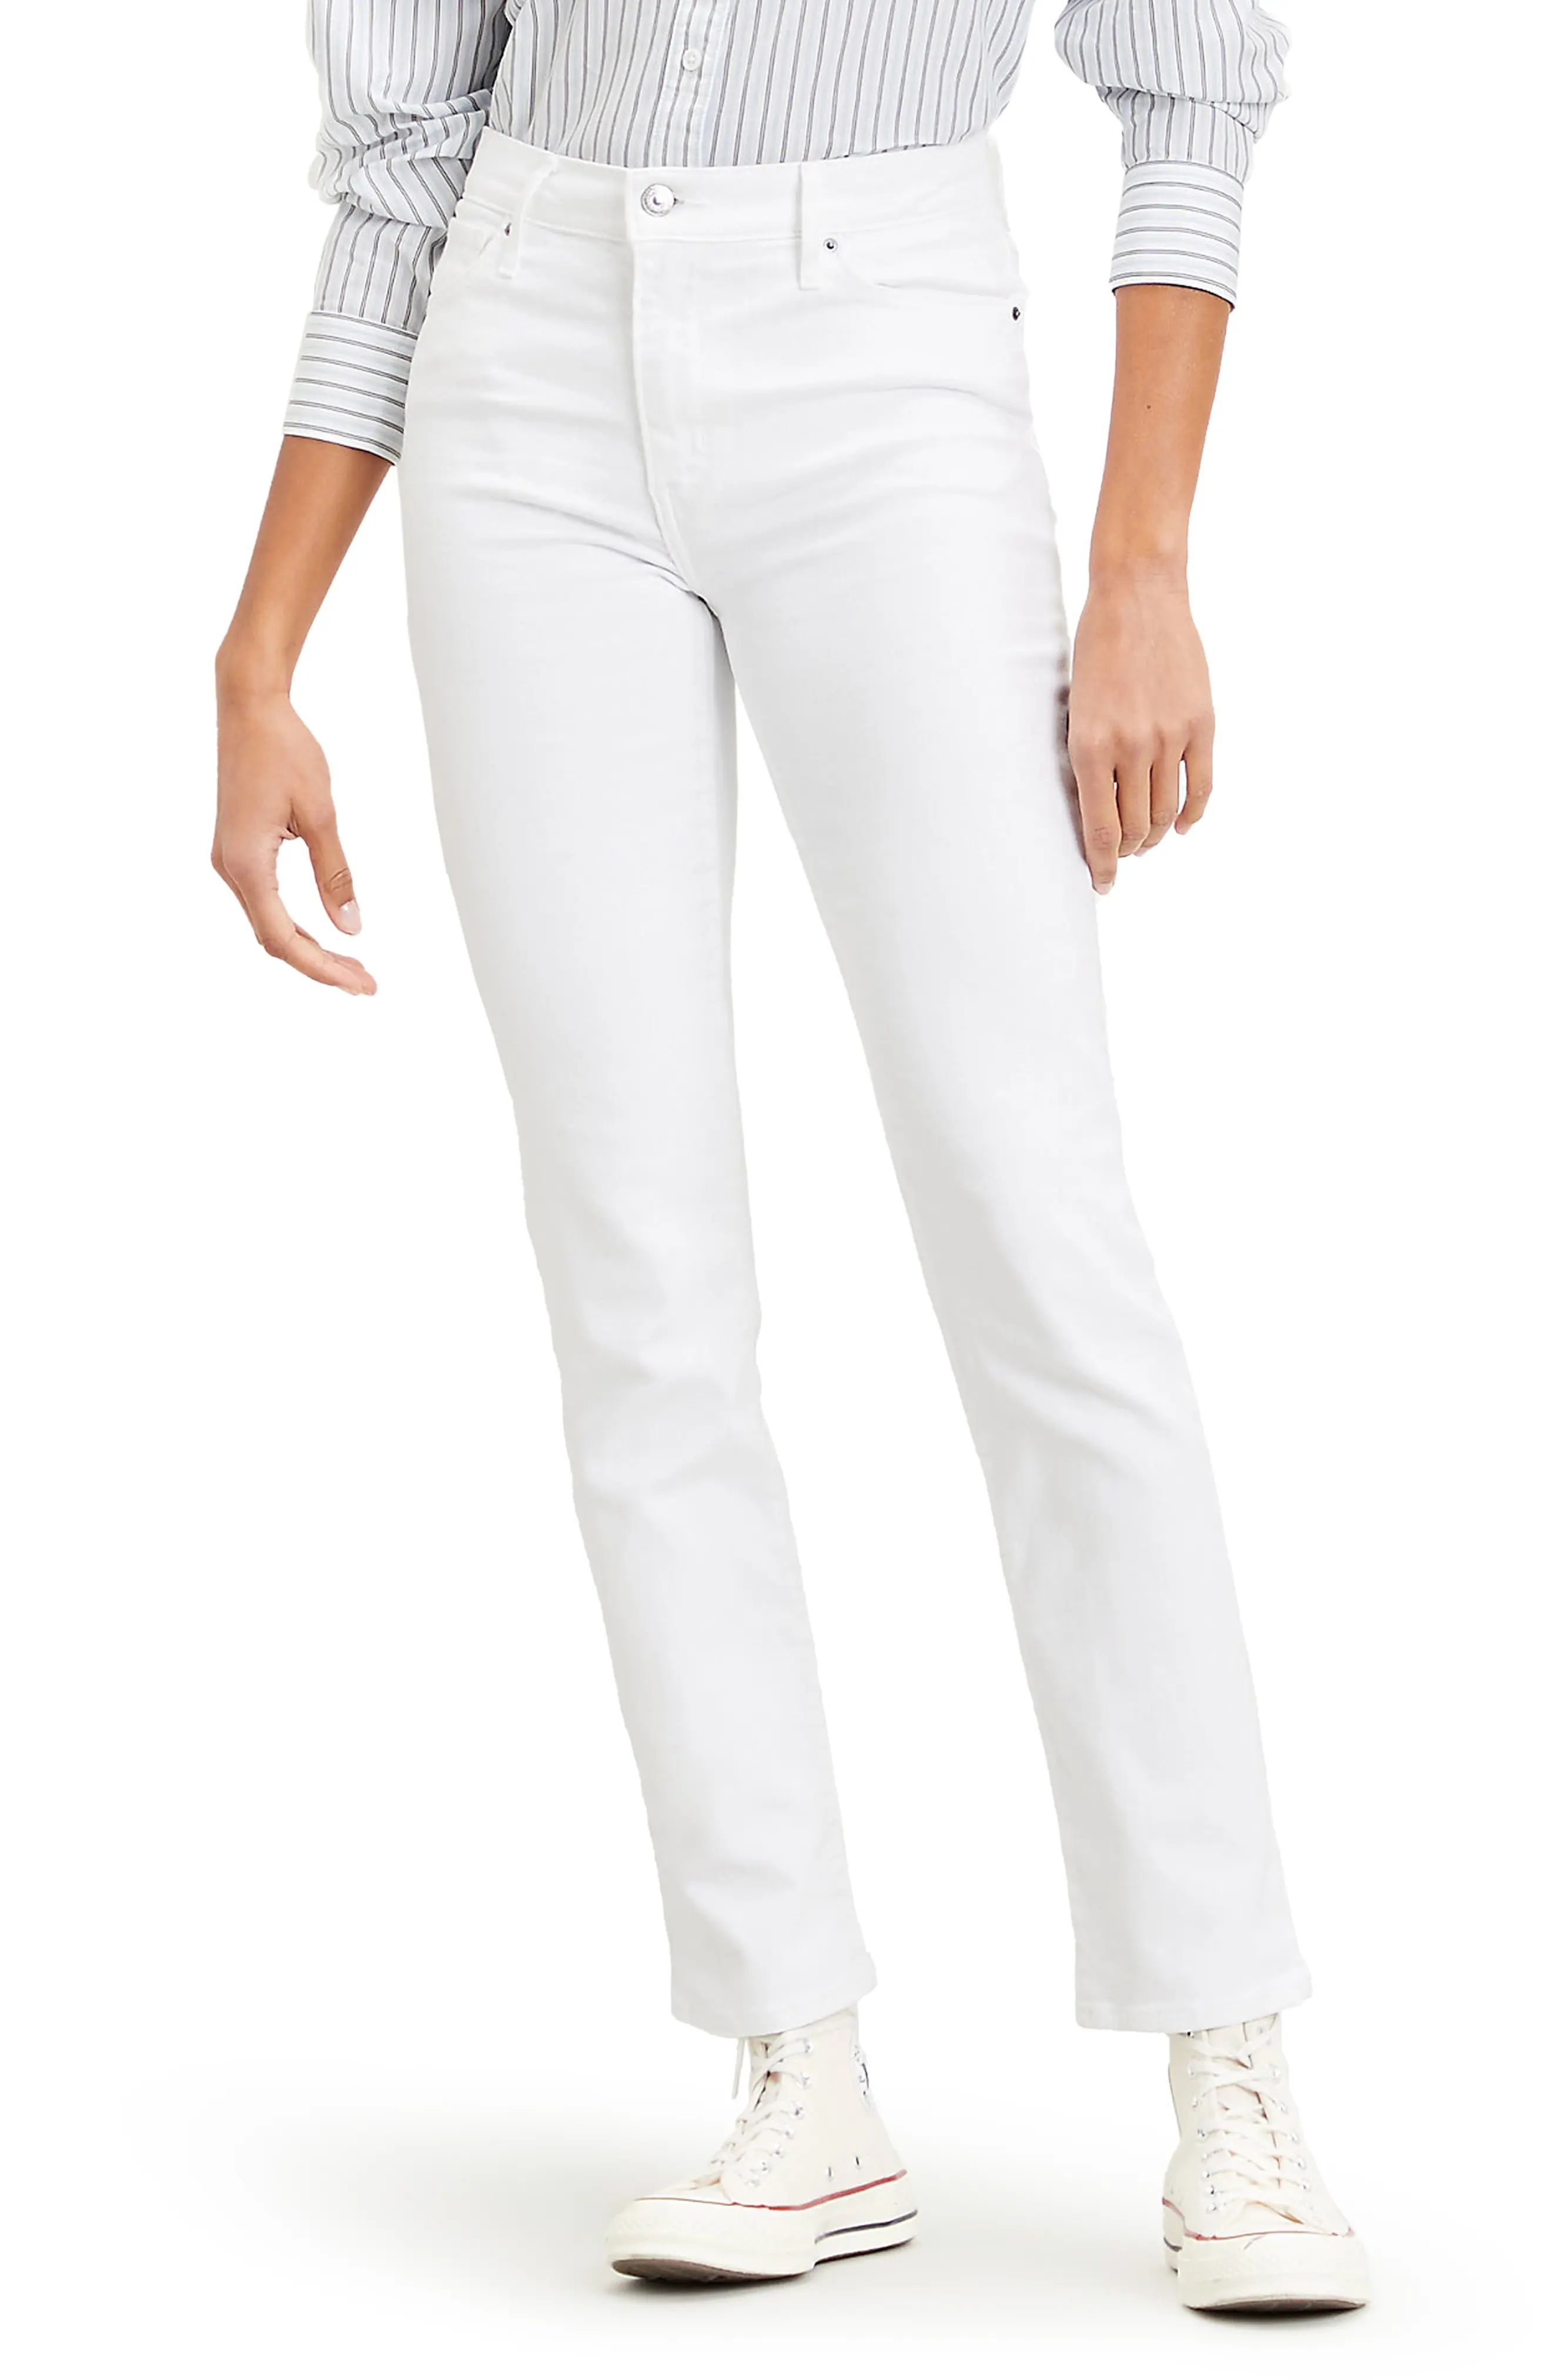 levi's 724(TM) High Waist Straight Leg Jeans, Size 27 X 32 in Western White at Nordstrom | Nordstrom